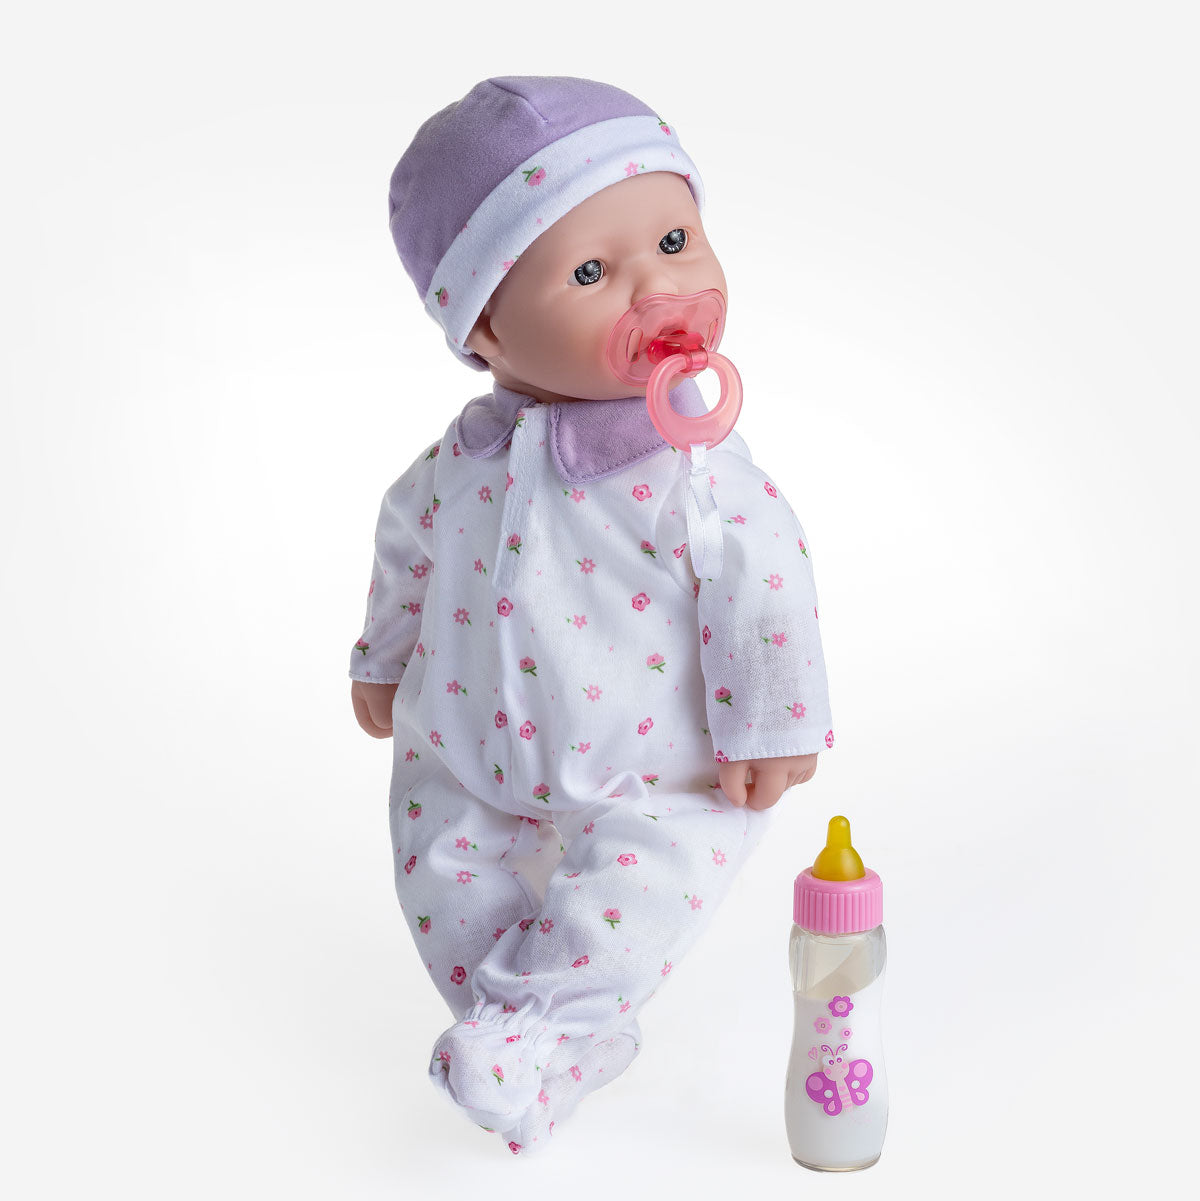 JC Toys, La Baby 16 inches Soft Body Baby Doll in Purple - Realistic Features